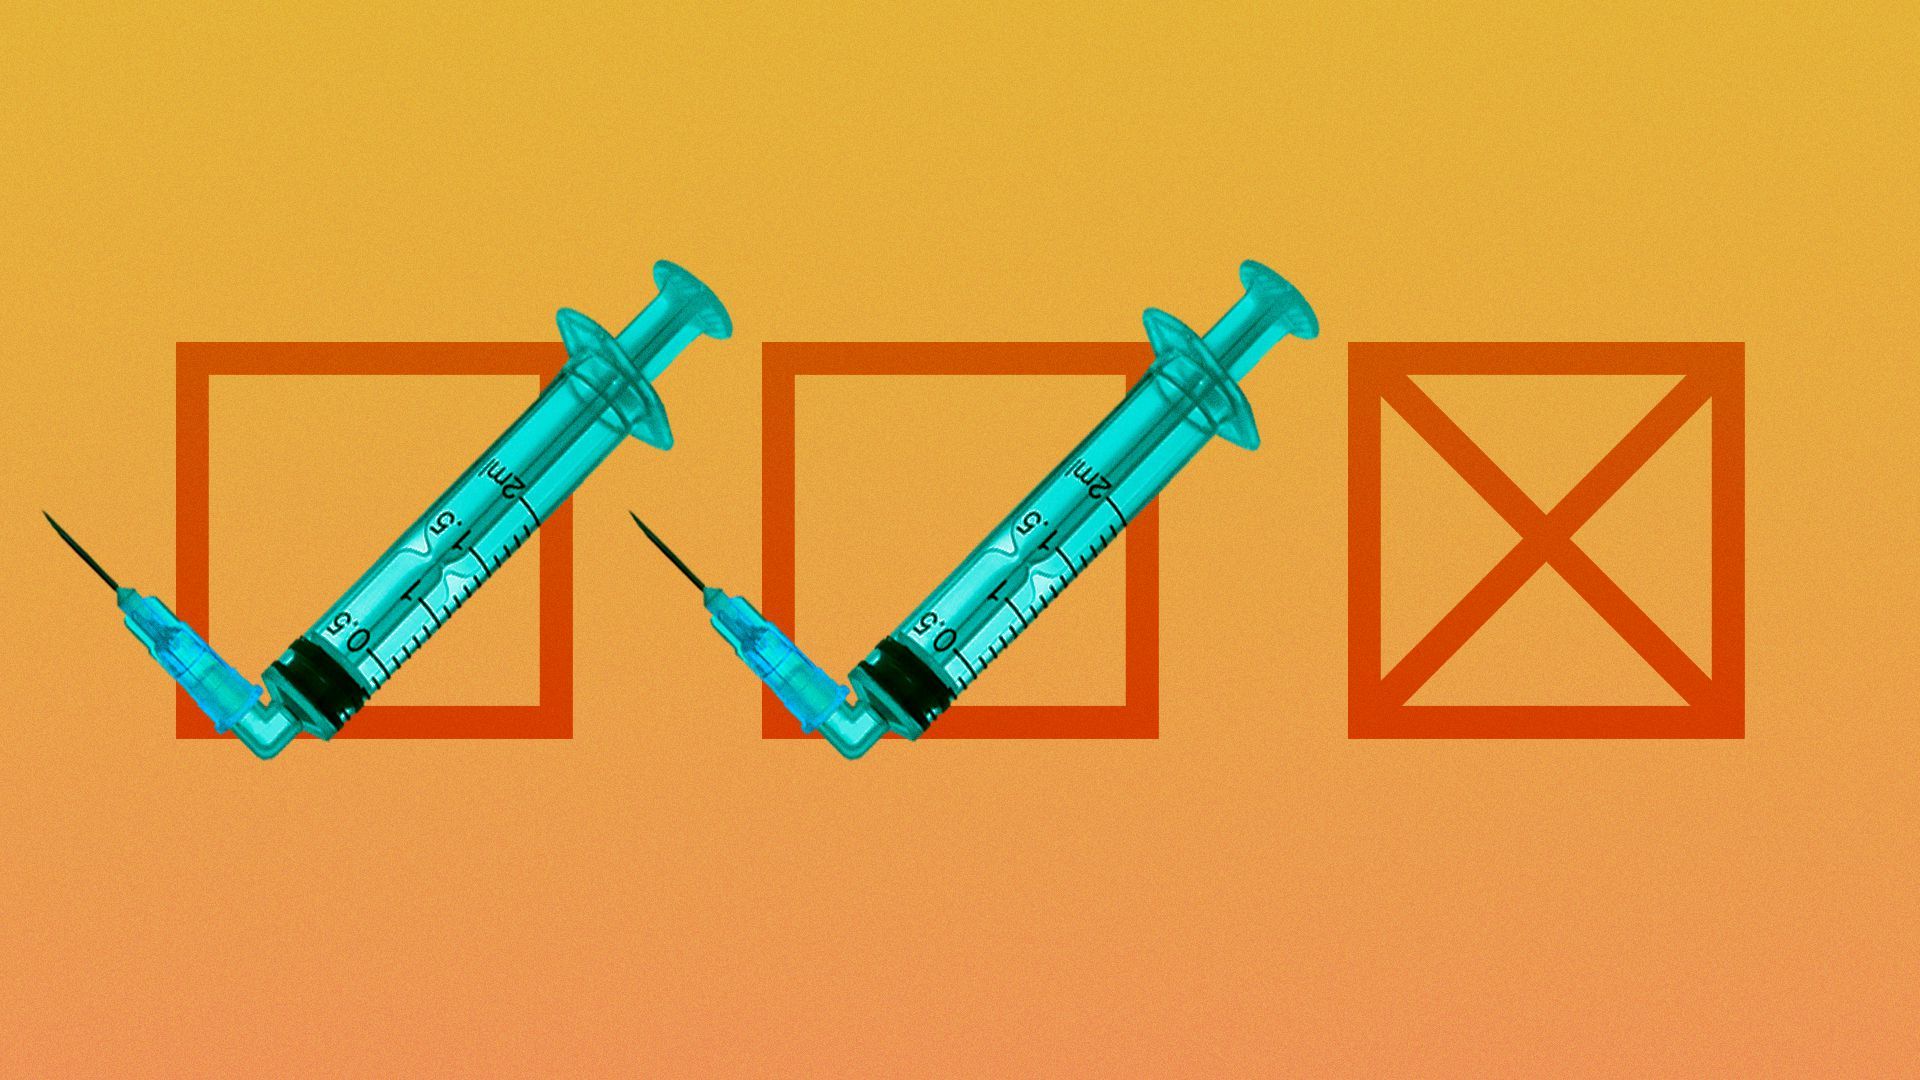 The first two boxes have a checkmark made of a syringe, and the third box has a large X in the middle.